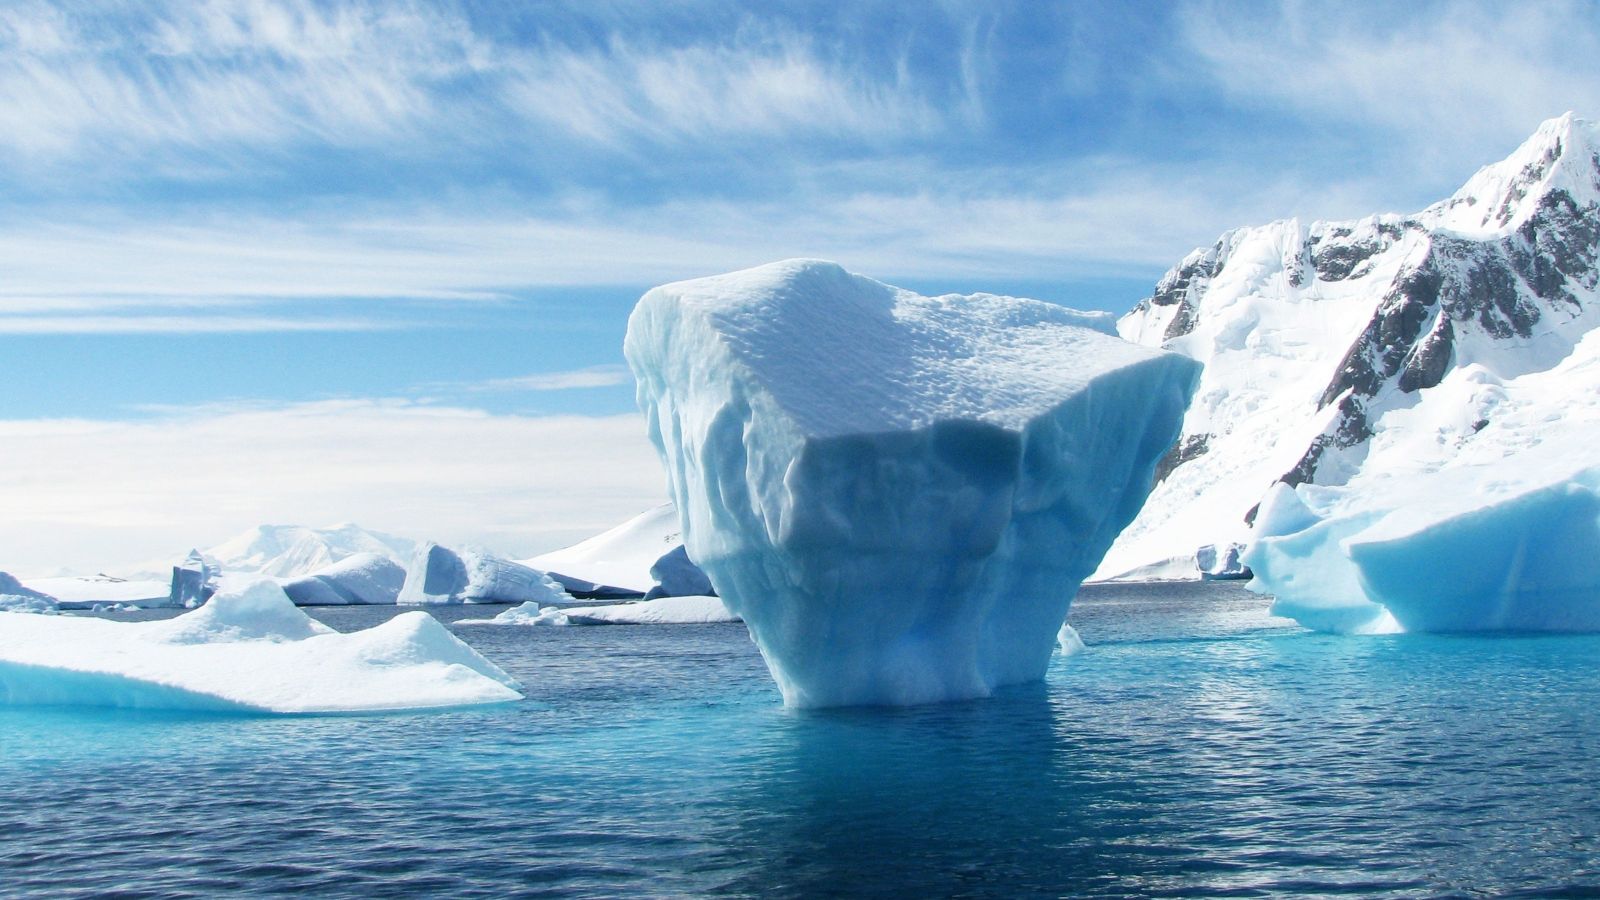 Piece of iceberg floating on water, with blue skies, blue water, and snow-covered hill in the background.